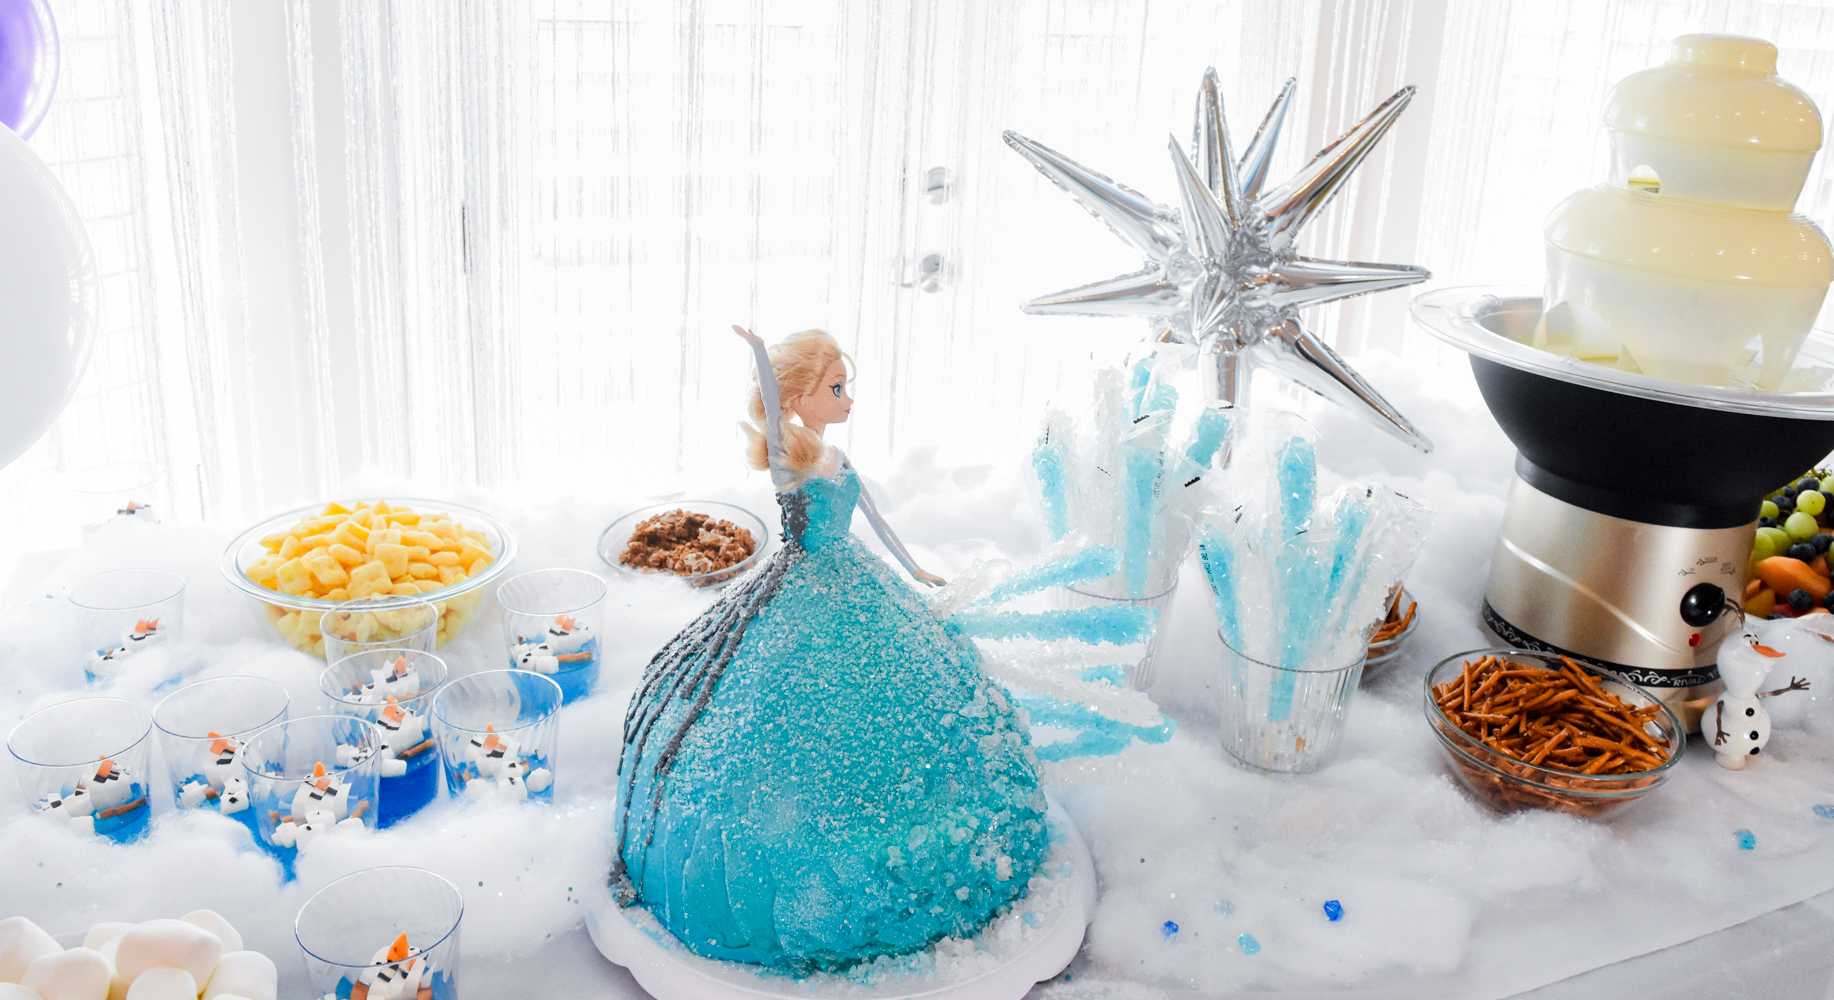 Elsa Barbie Cake from the Movie Frozen